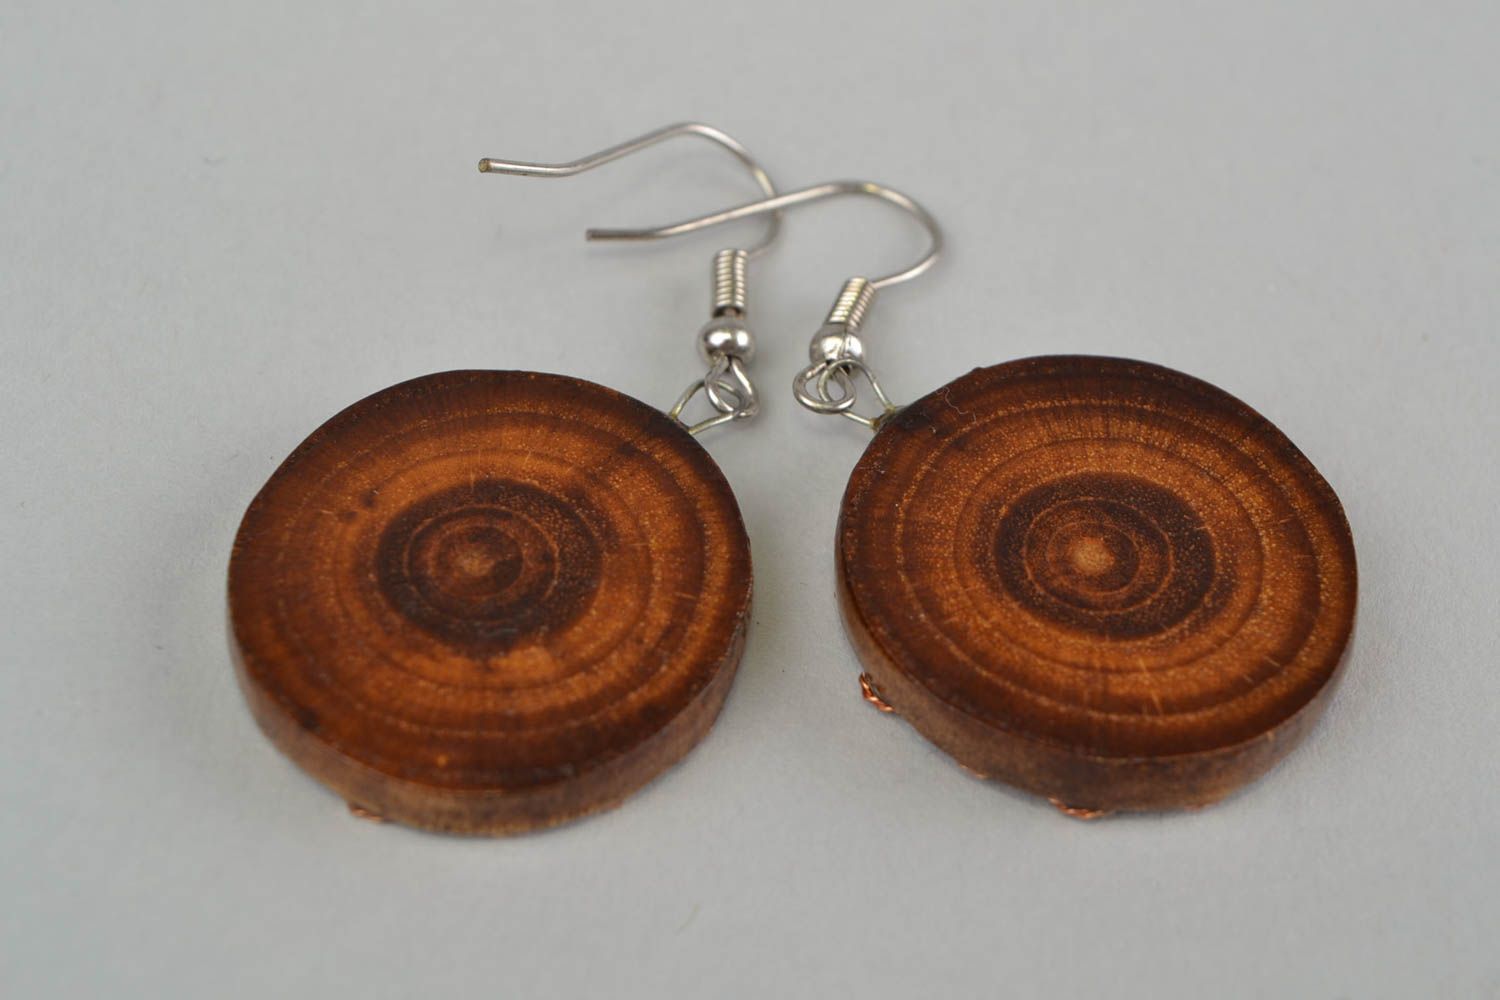 Beautiful homemade wooden earrings designer acessories for girls jewelry trends photo 5